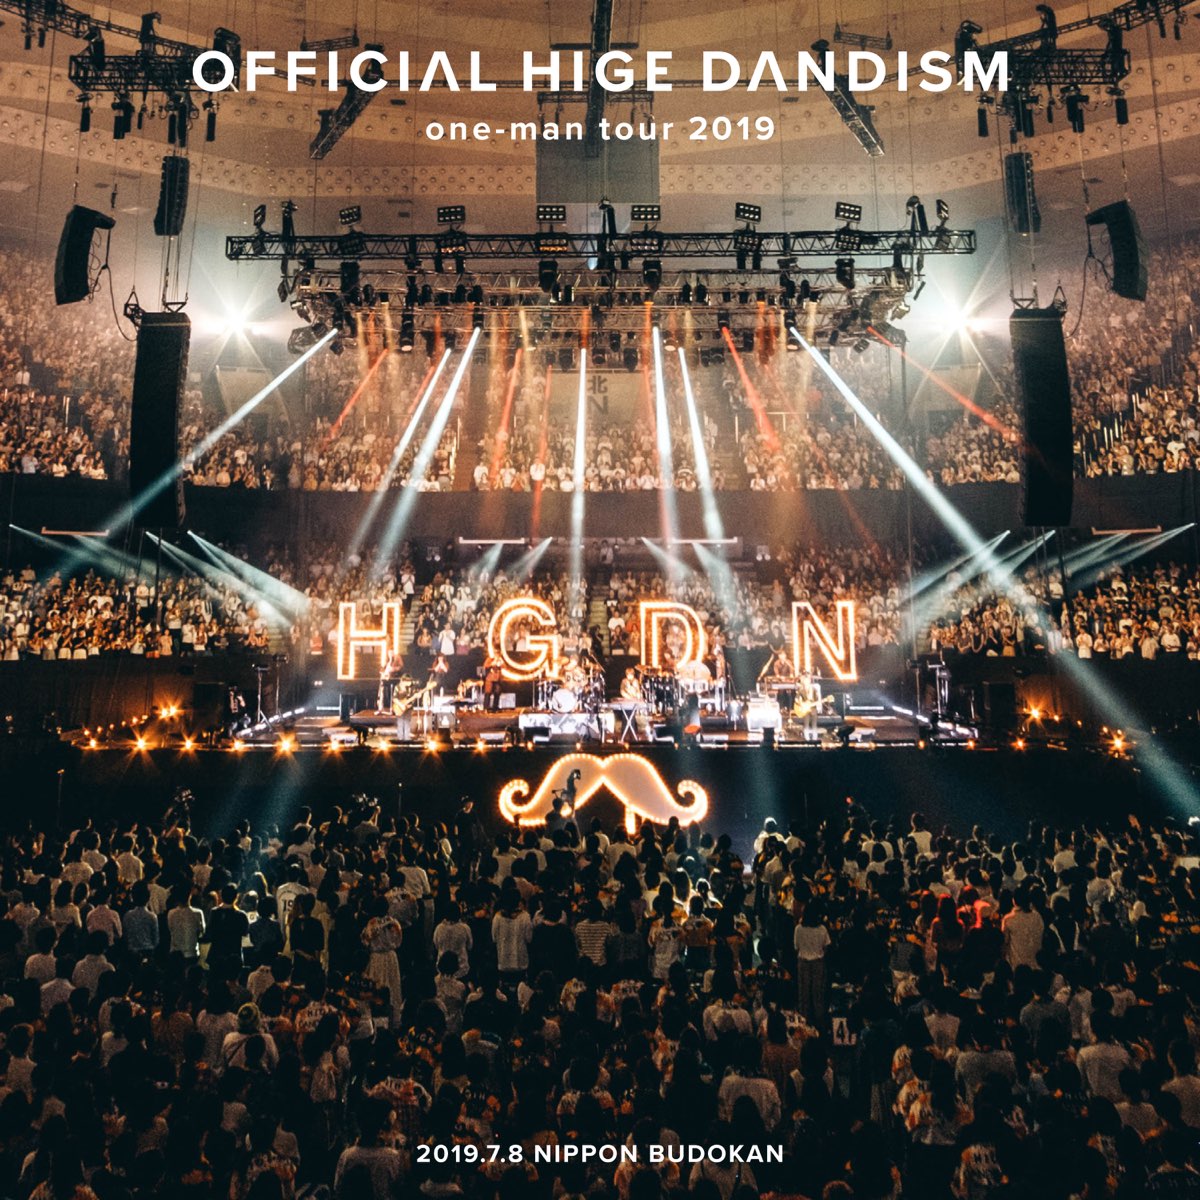 Apple Music 上Official髭男dism的专辑《one-man tour 2019 at 2019.07